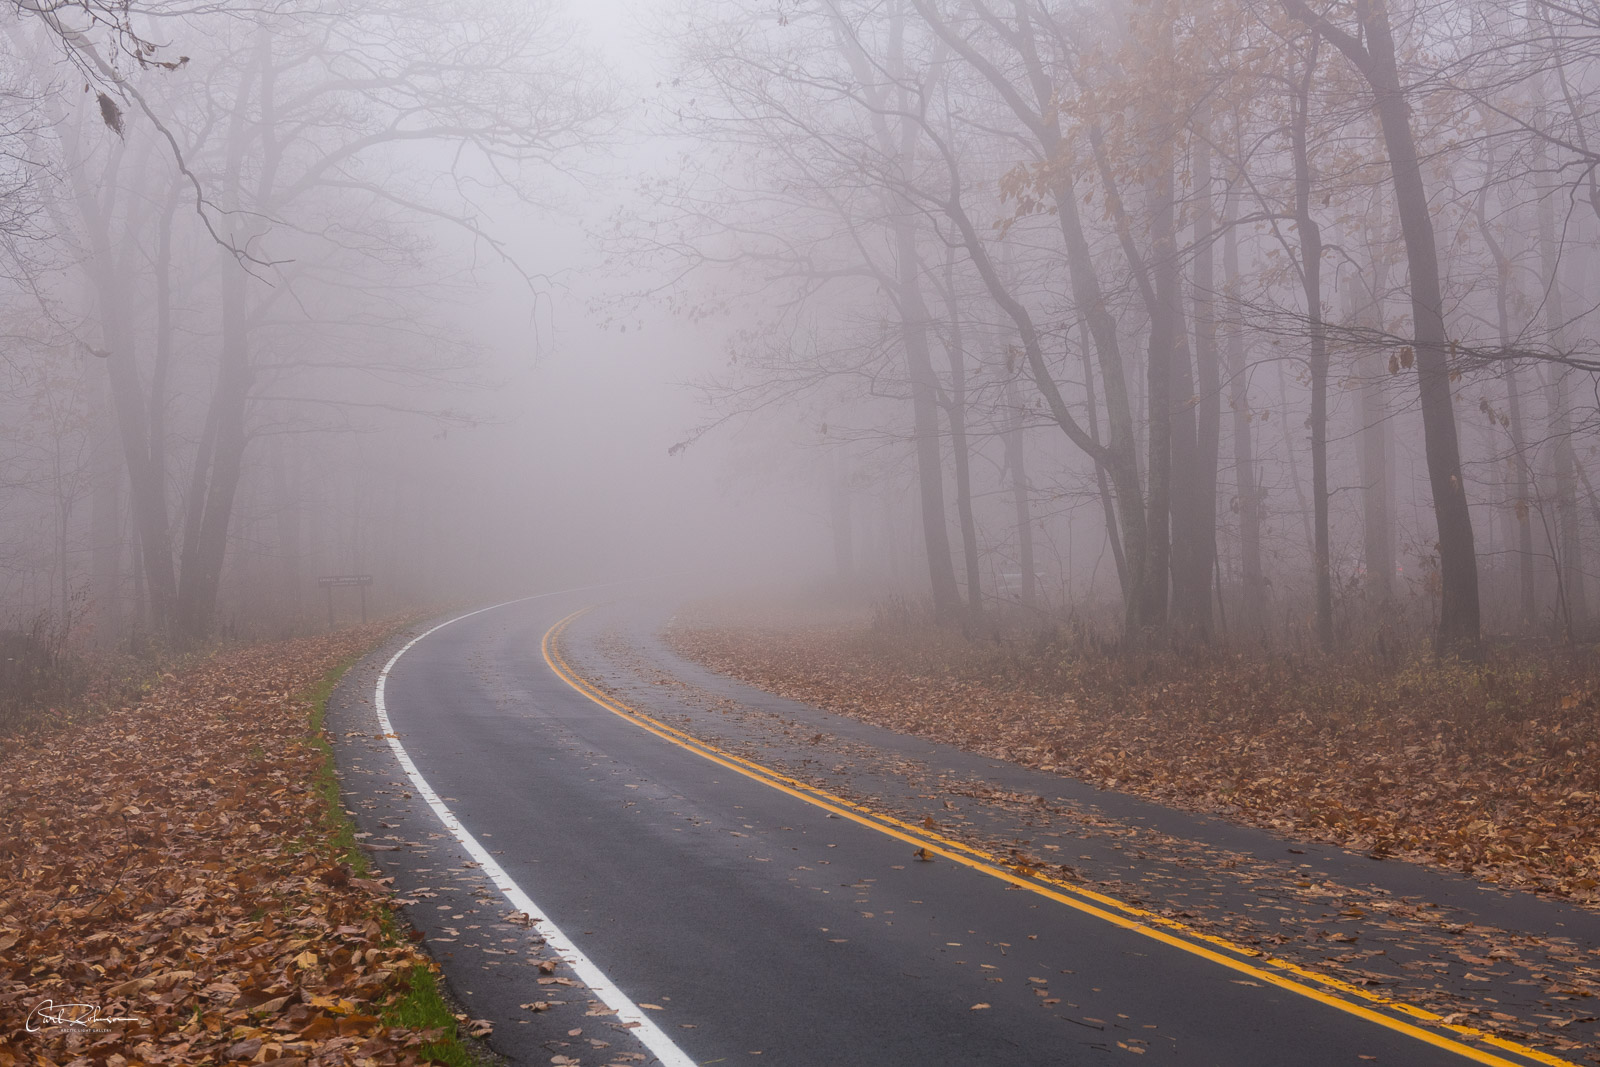 On a particularly foggy morning in Shenandoah National Park, I stopped on my drive to capture the curve of the road seemingly...